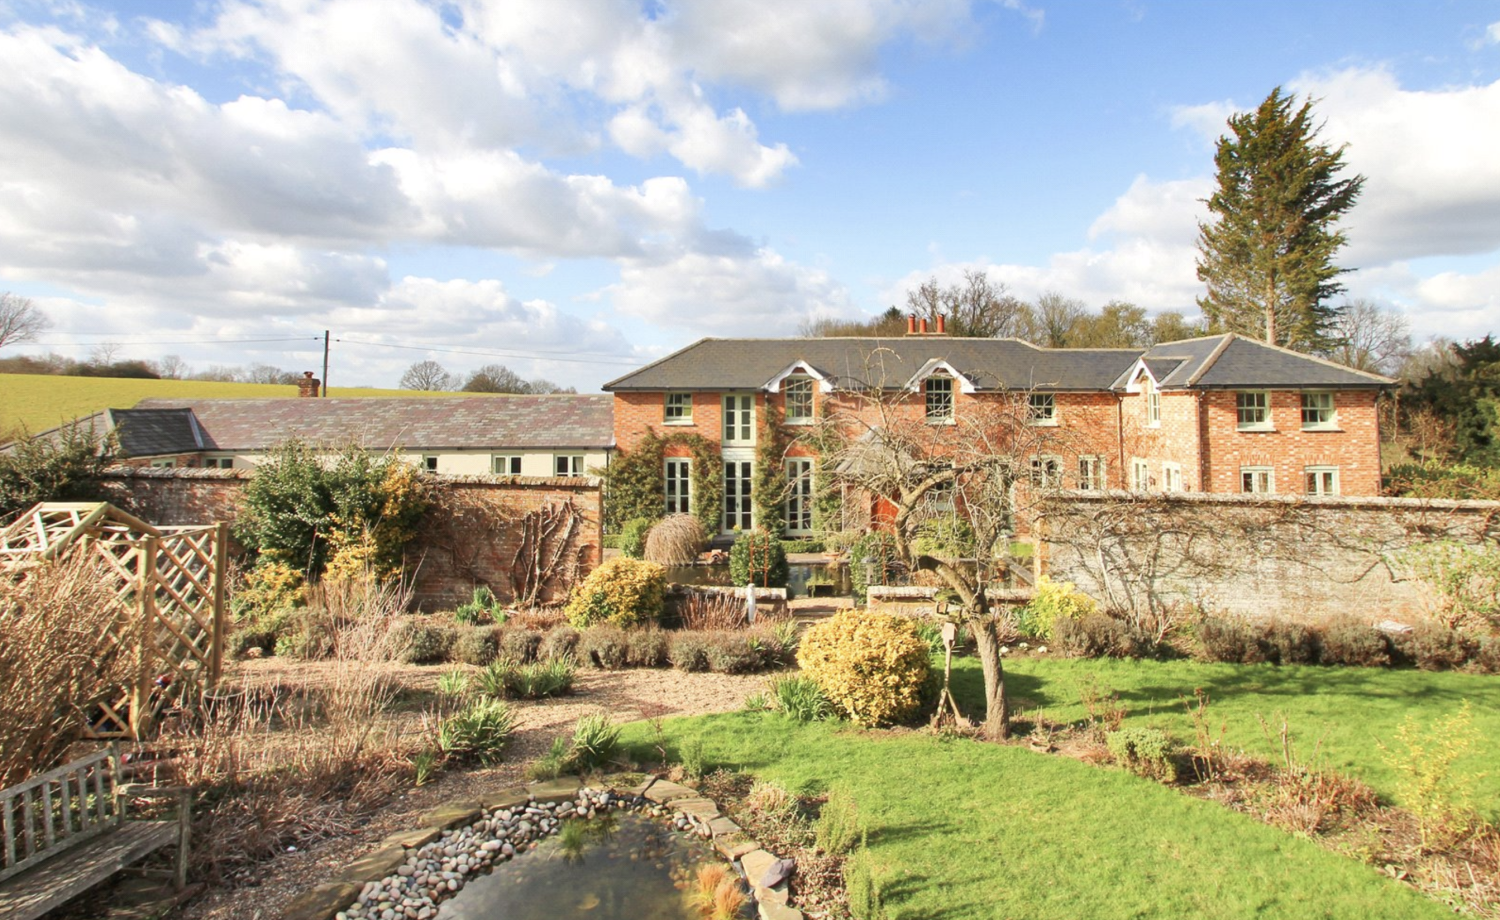 Stunning period red brick country mansion with mature gardens and shrubs surrounding